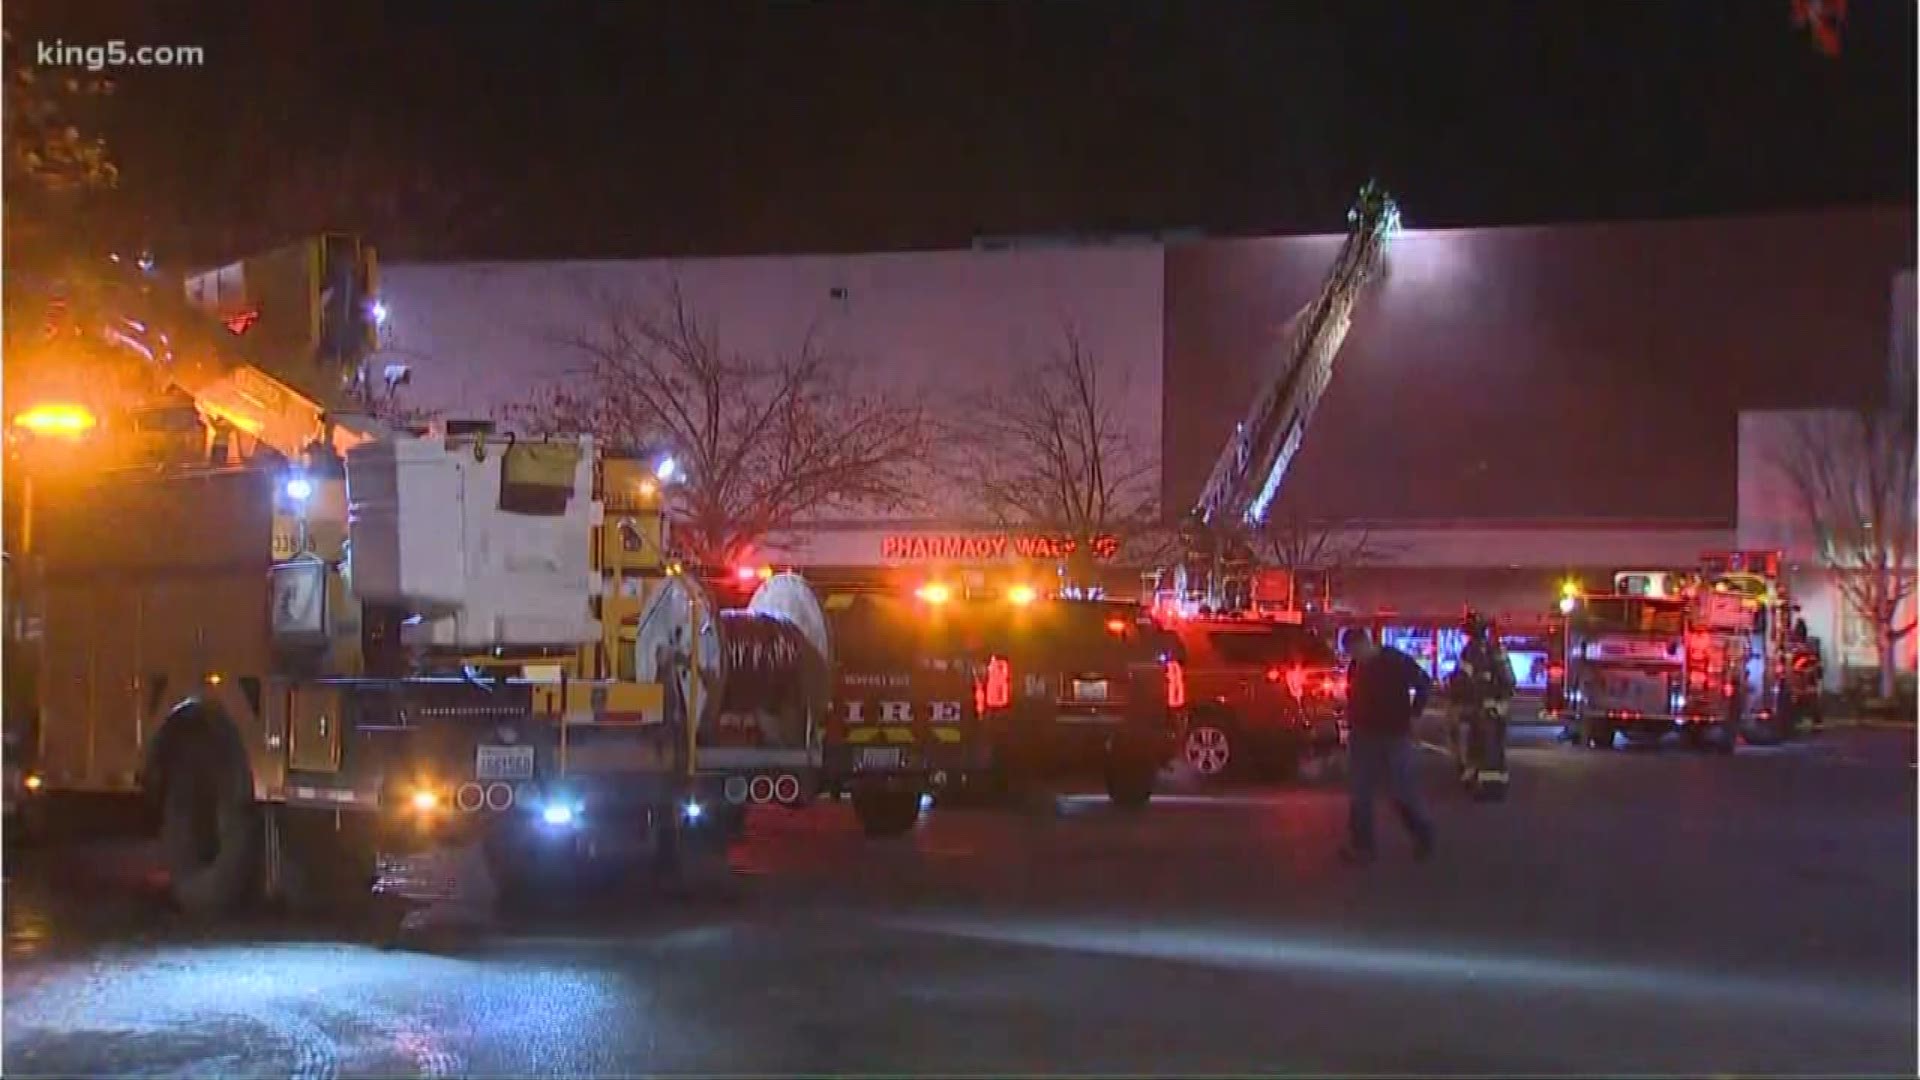 Seattle police believe someone intentionally started a fire inside the Fred Meyer store on Lake City Way Tuesday night.